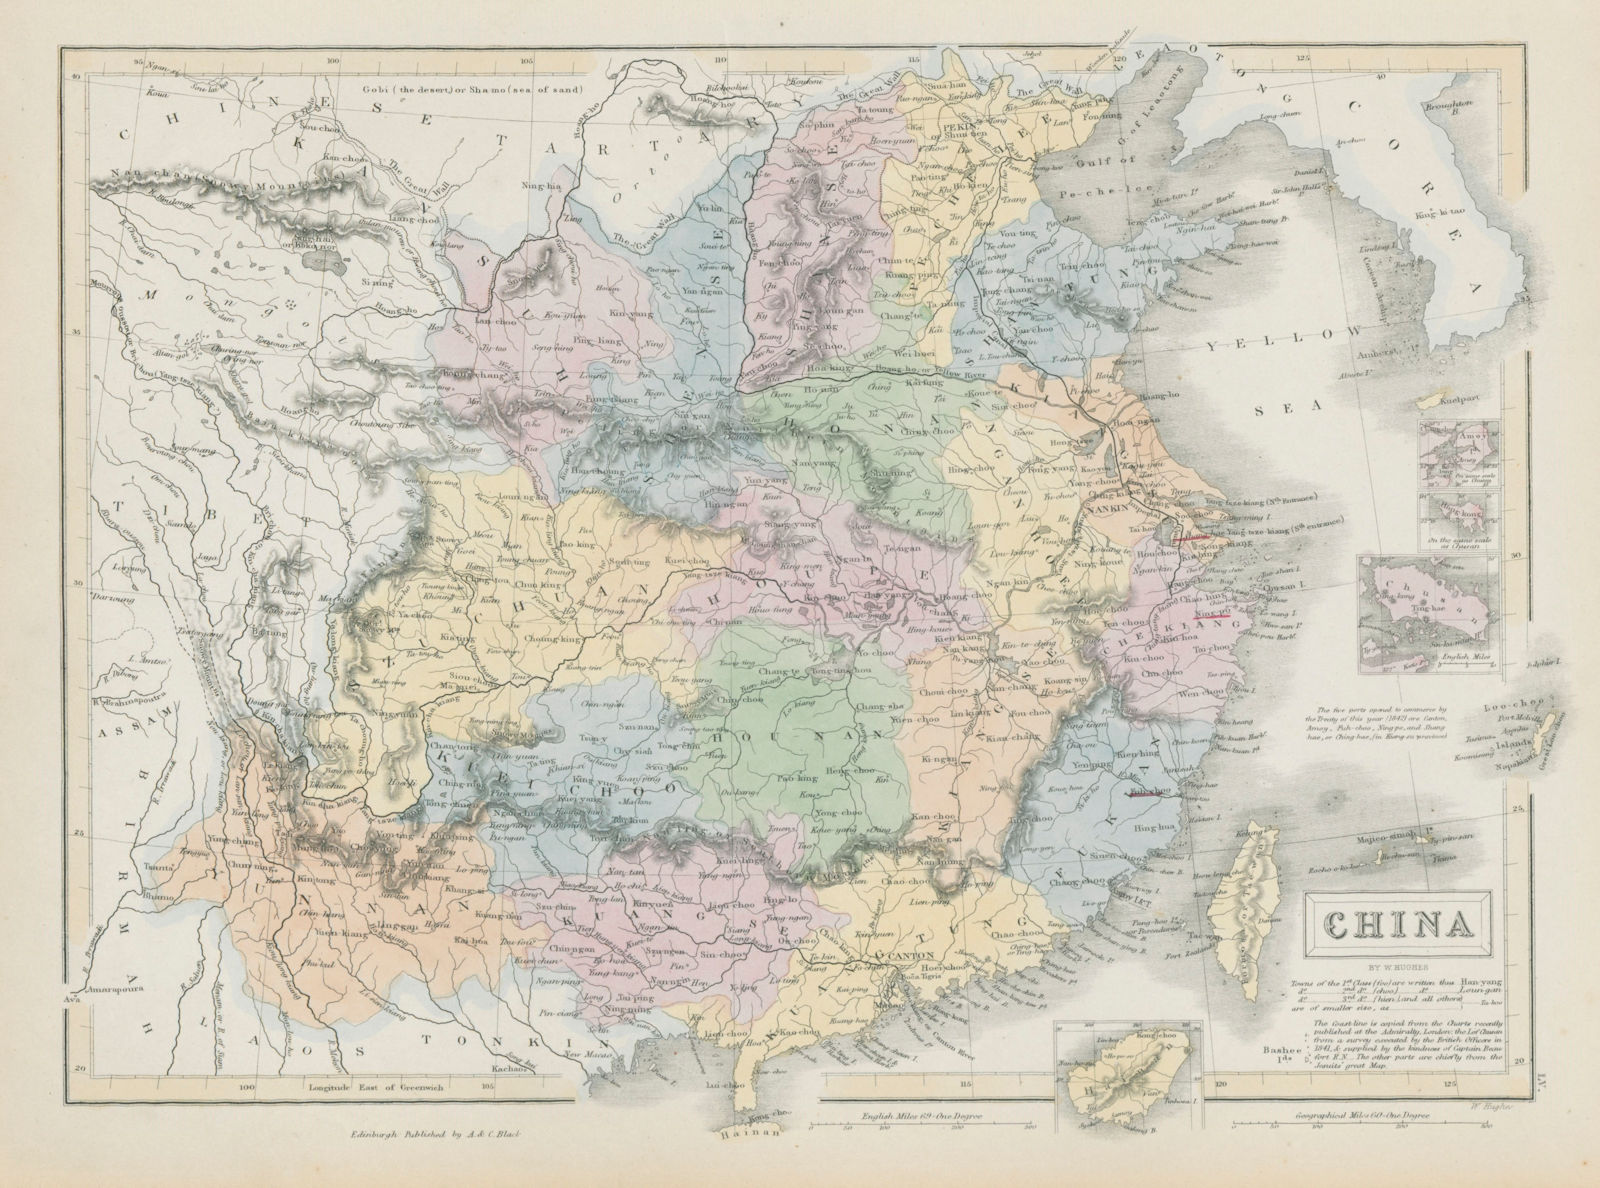 China showing provinces & Great Wall. 1842 Treaty Ports. WILLIAM HUGHES 1856 map